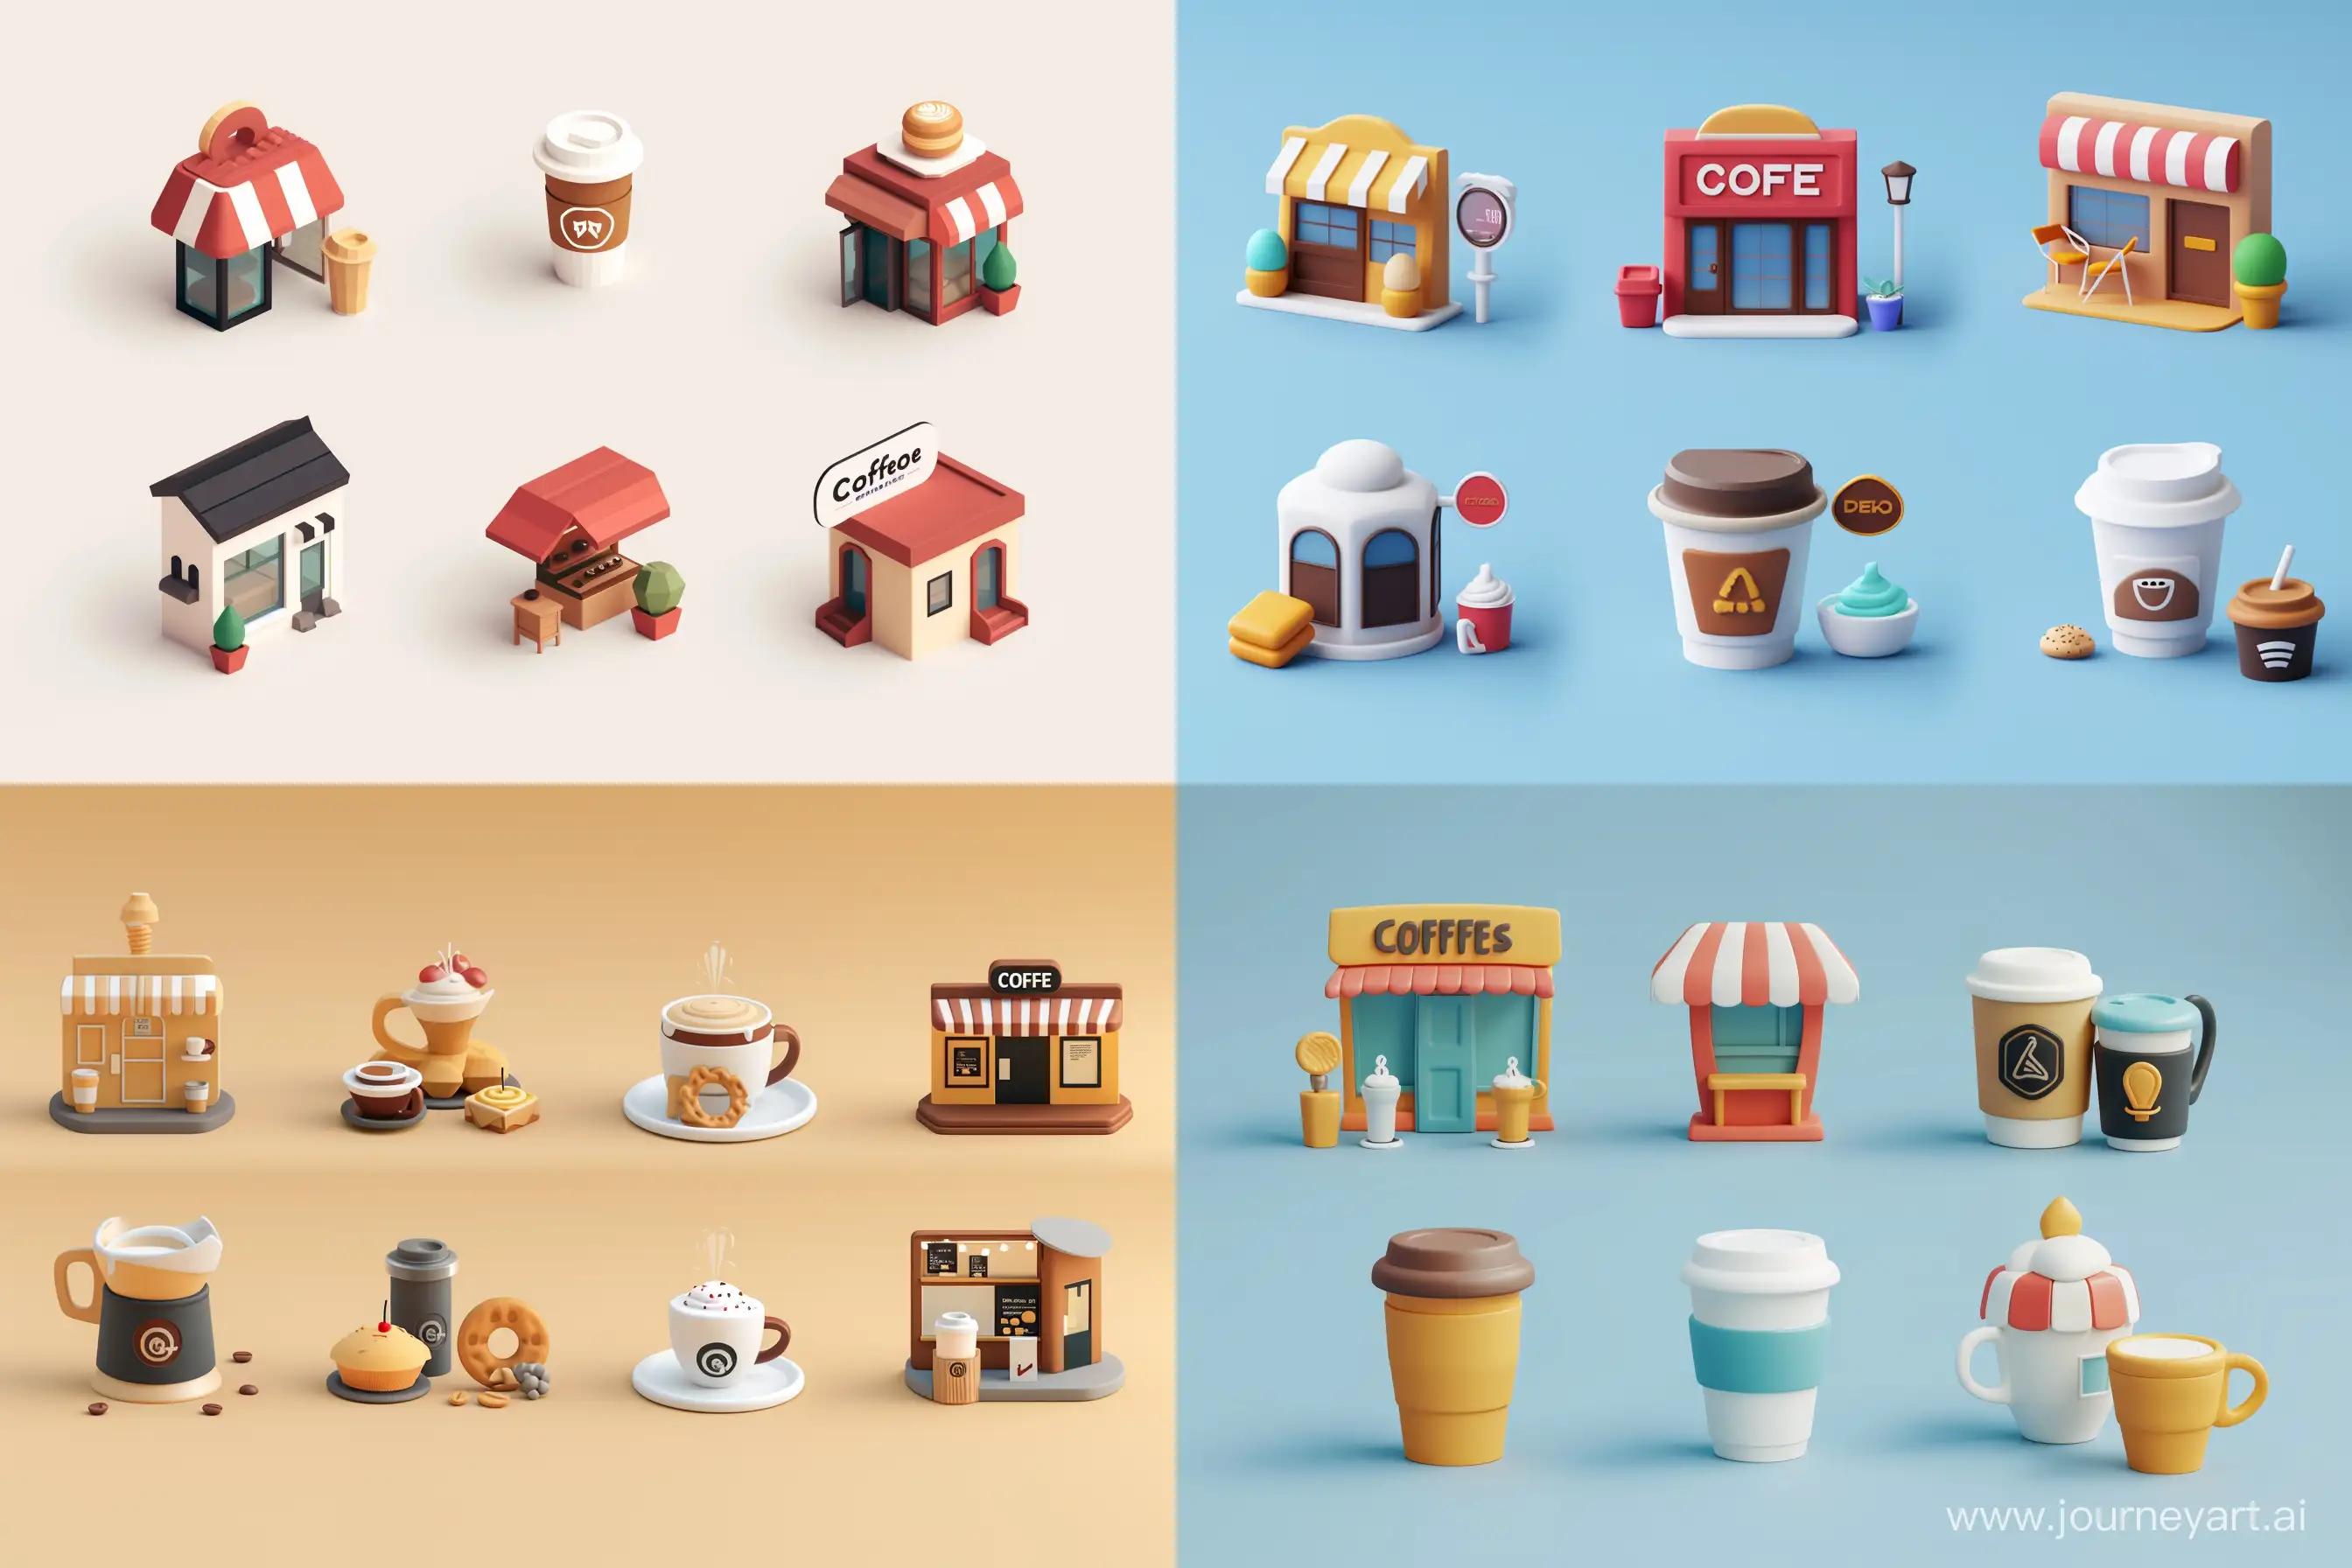 Modern-Coffee-Shop-and-Cafe-Icons-Set-with-Intricate-3D-Rendered-Details